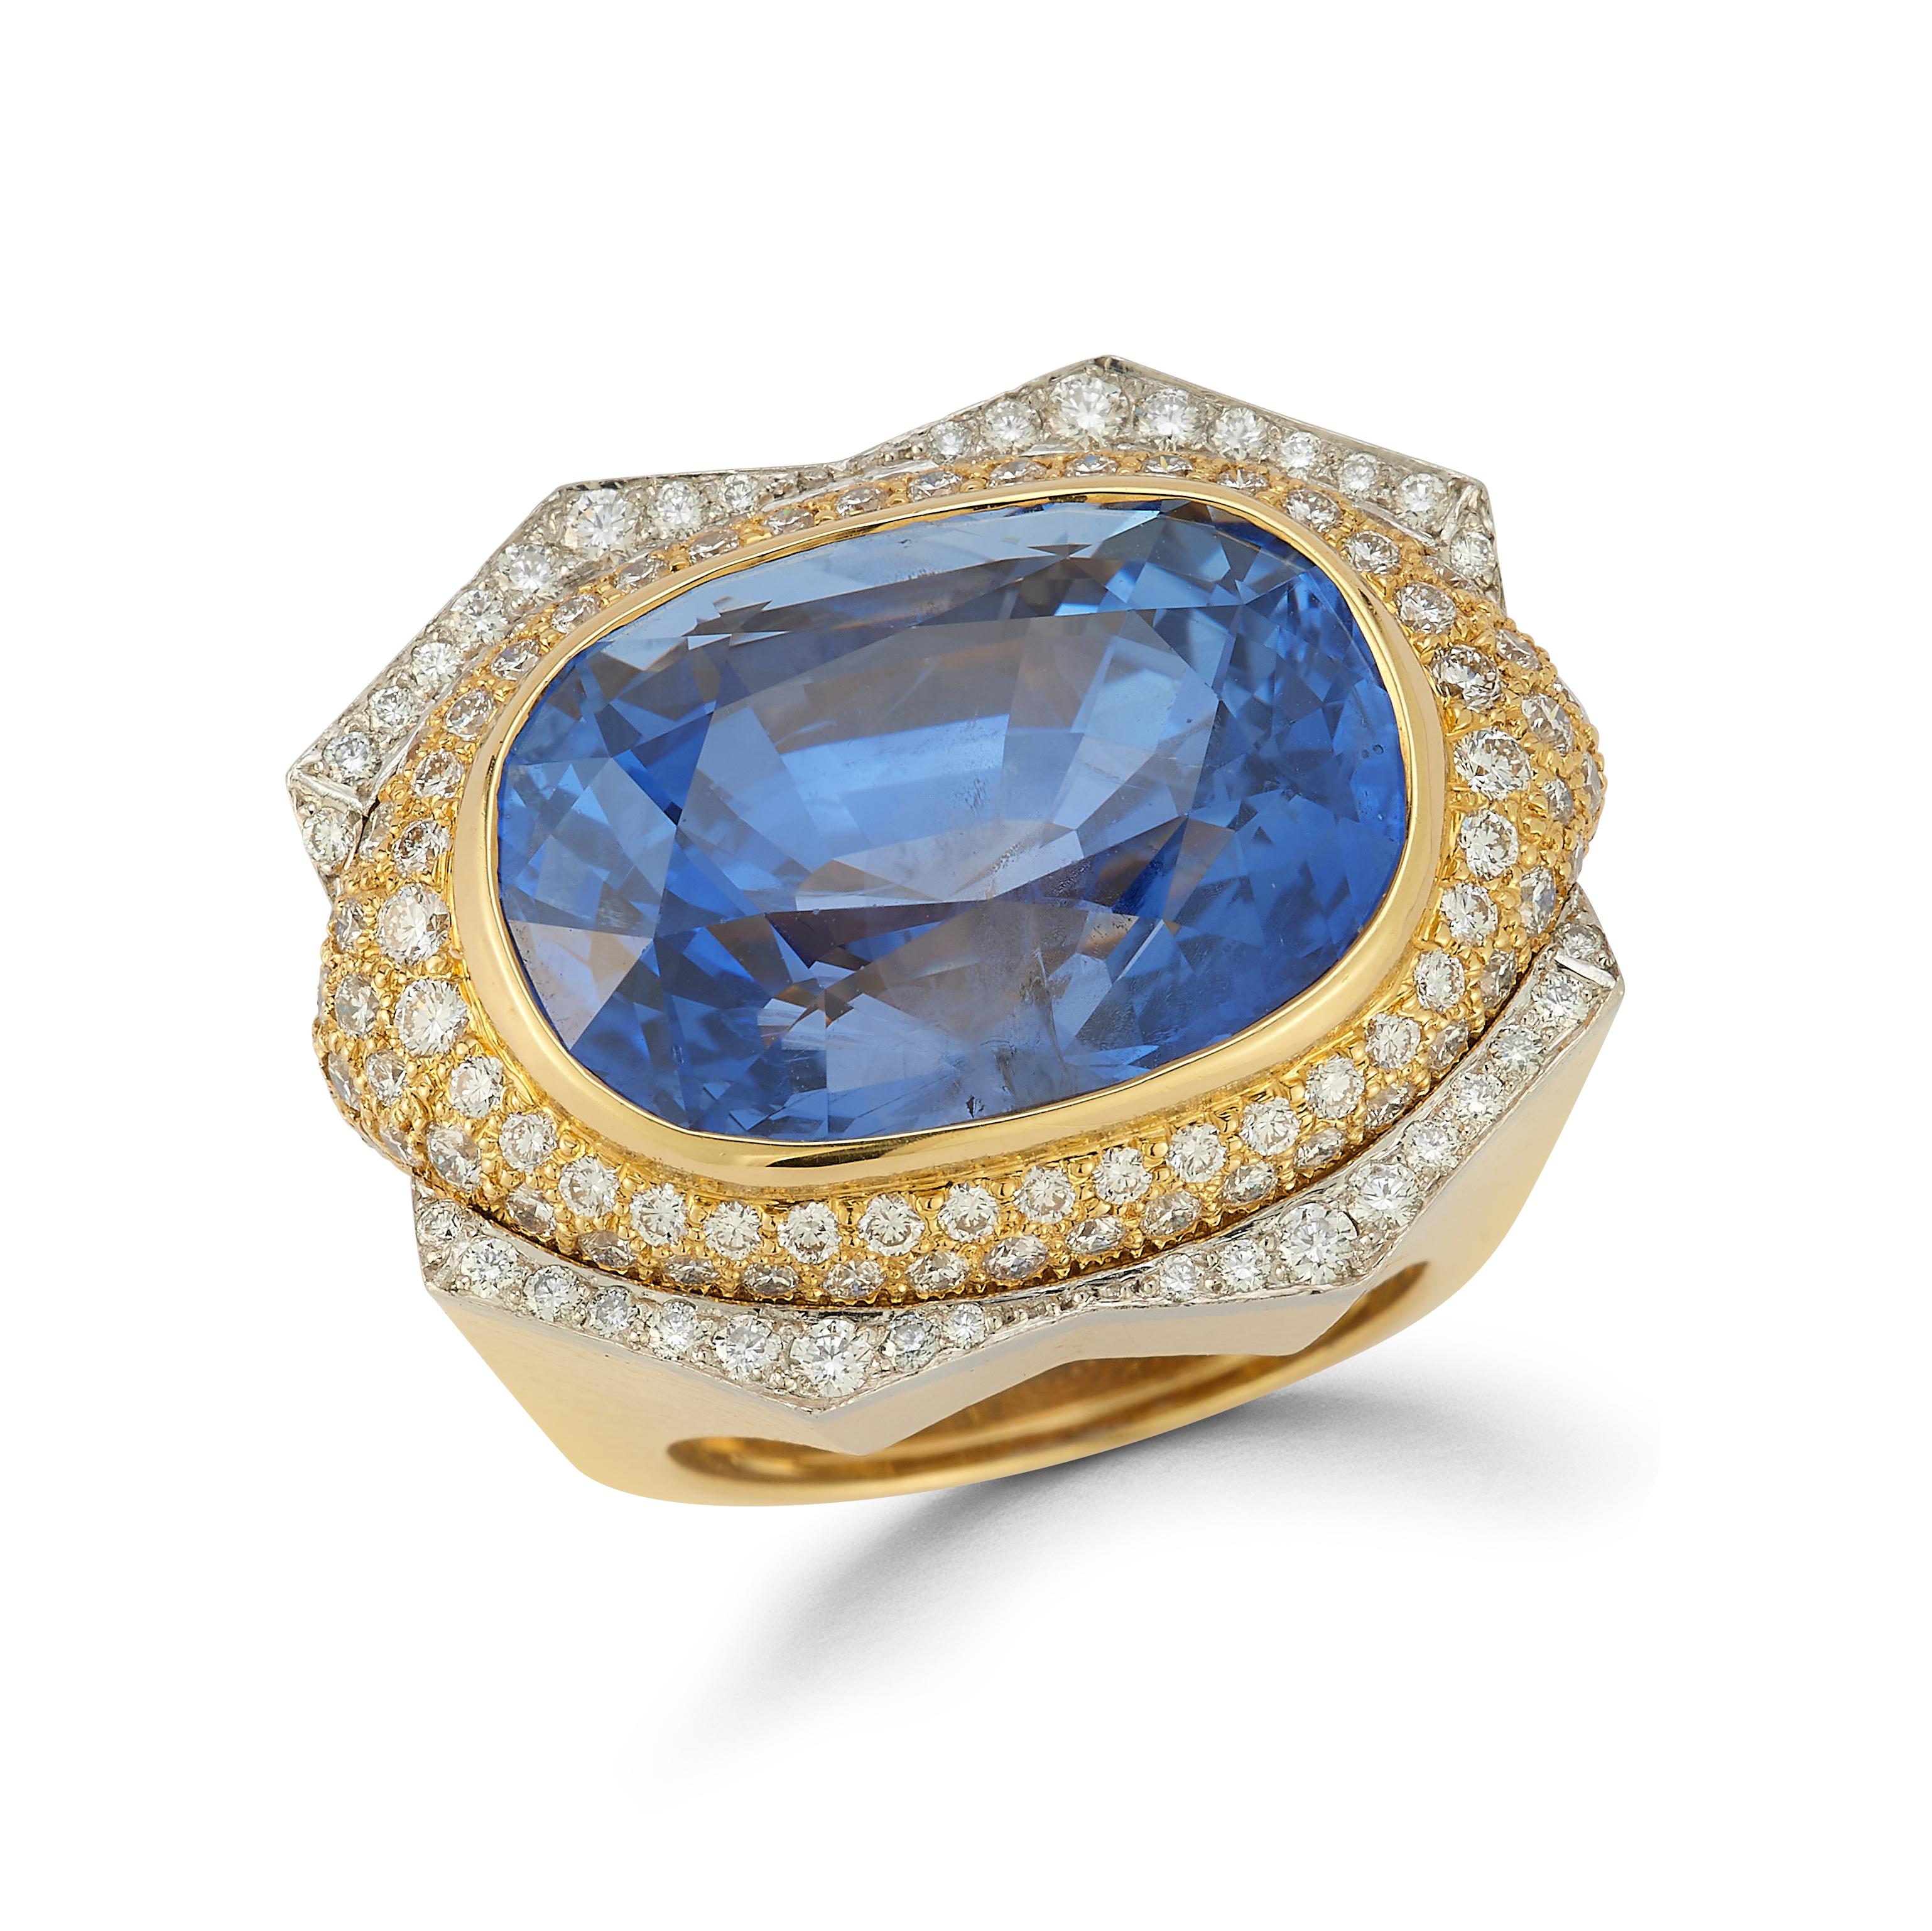 David Webb Oval Cut Sapphire Men's Ring,

1 oval sapphire set west to east. Surrounded by round cut diamonds set in 18k hammered yellow and white gold 

Sapphire Weight: 32.60 Carats 

Diamond Weight: 1.75 carats 

Accompanied by a certificate of